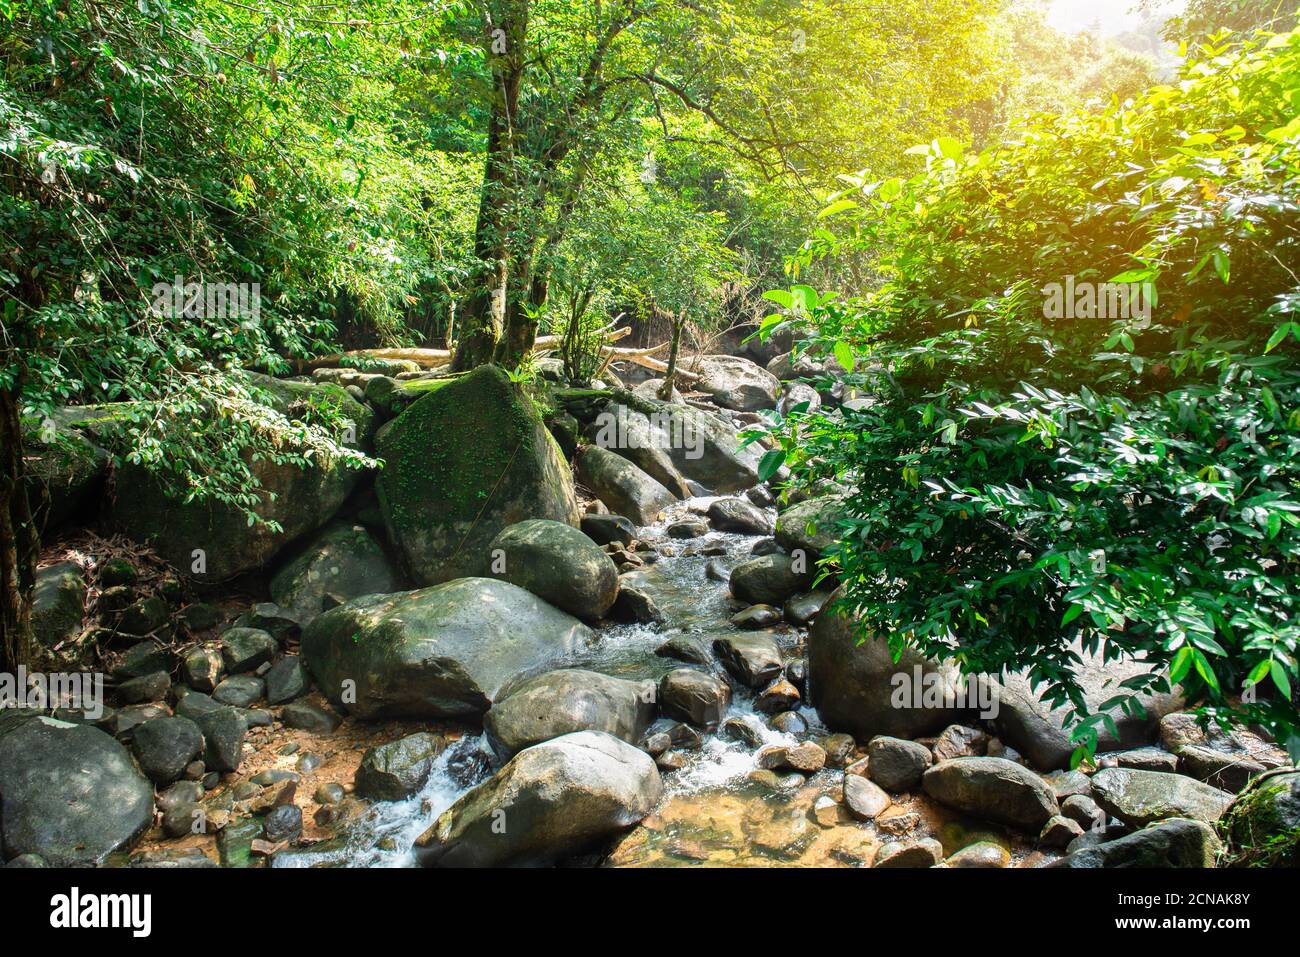 The beauty of nature in Phlio Waterfall National Park sign at Chanthaburi, Thailand. Stock Photo